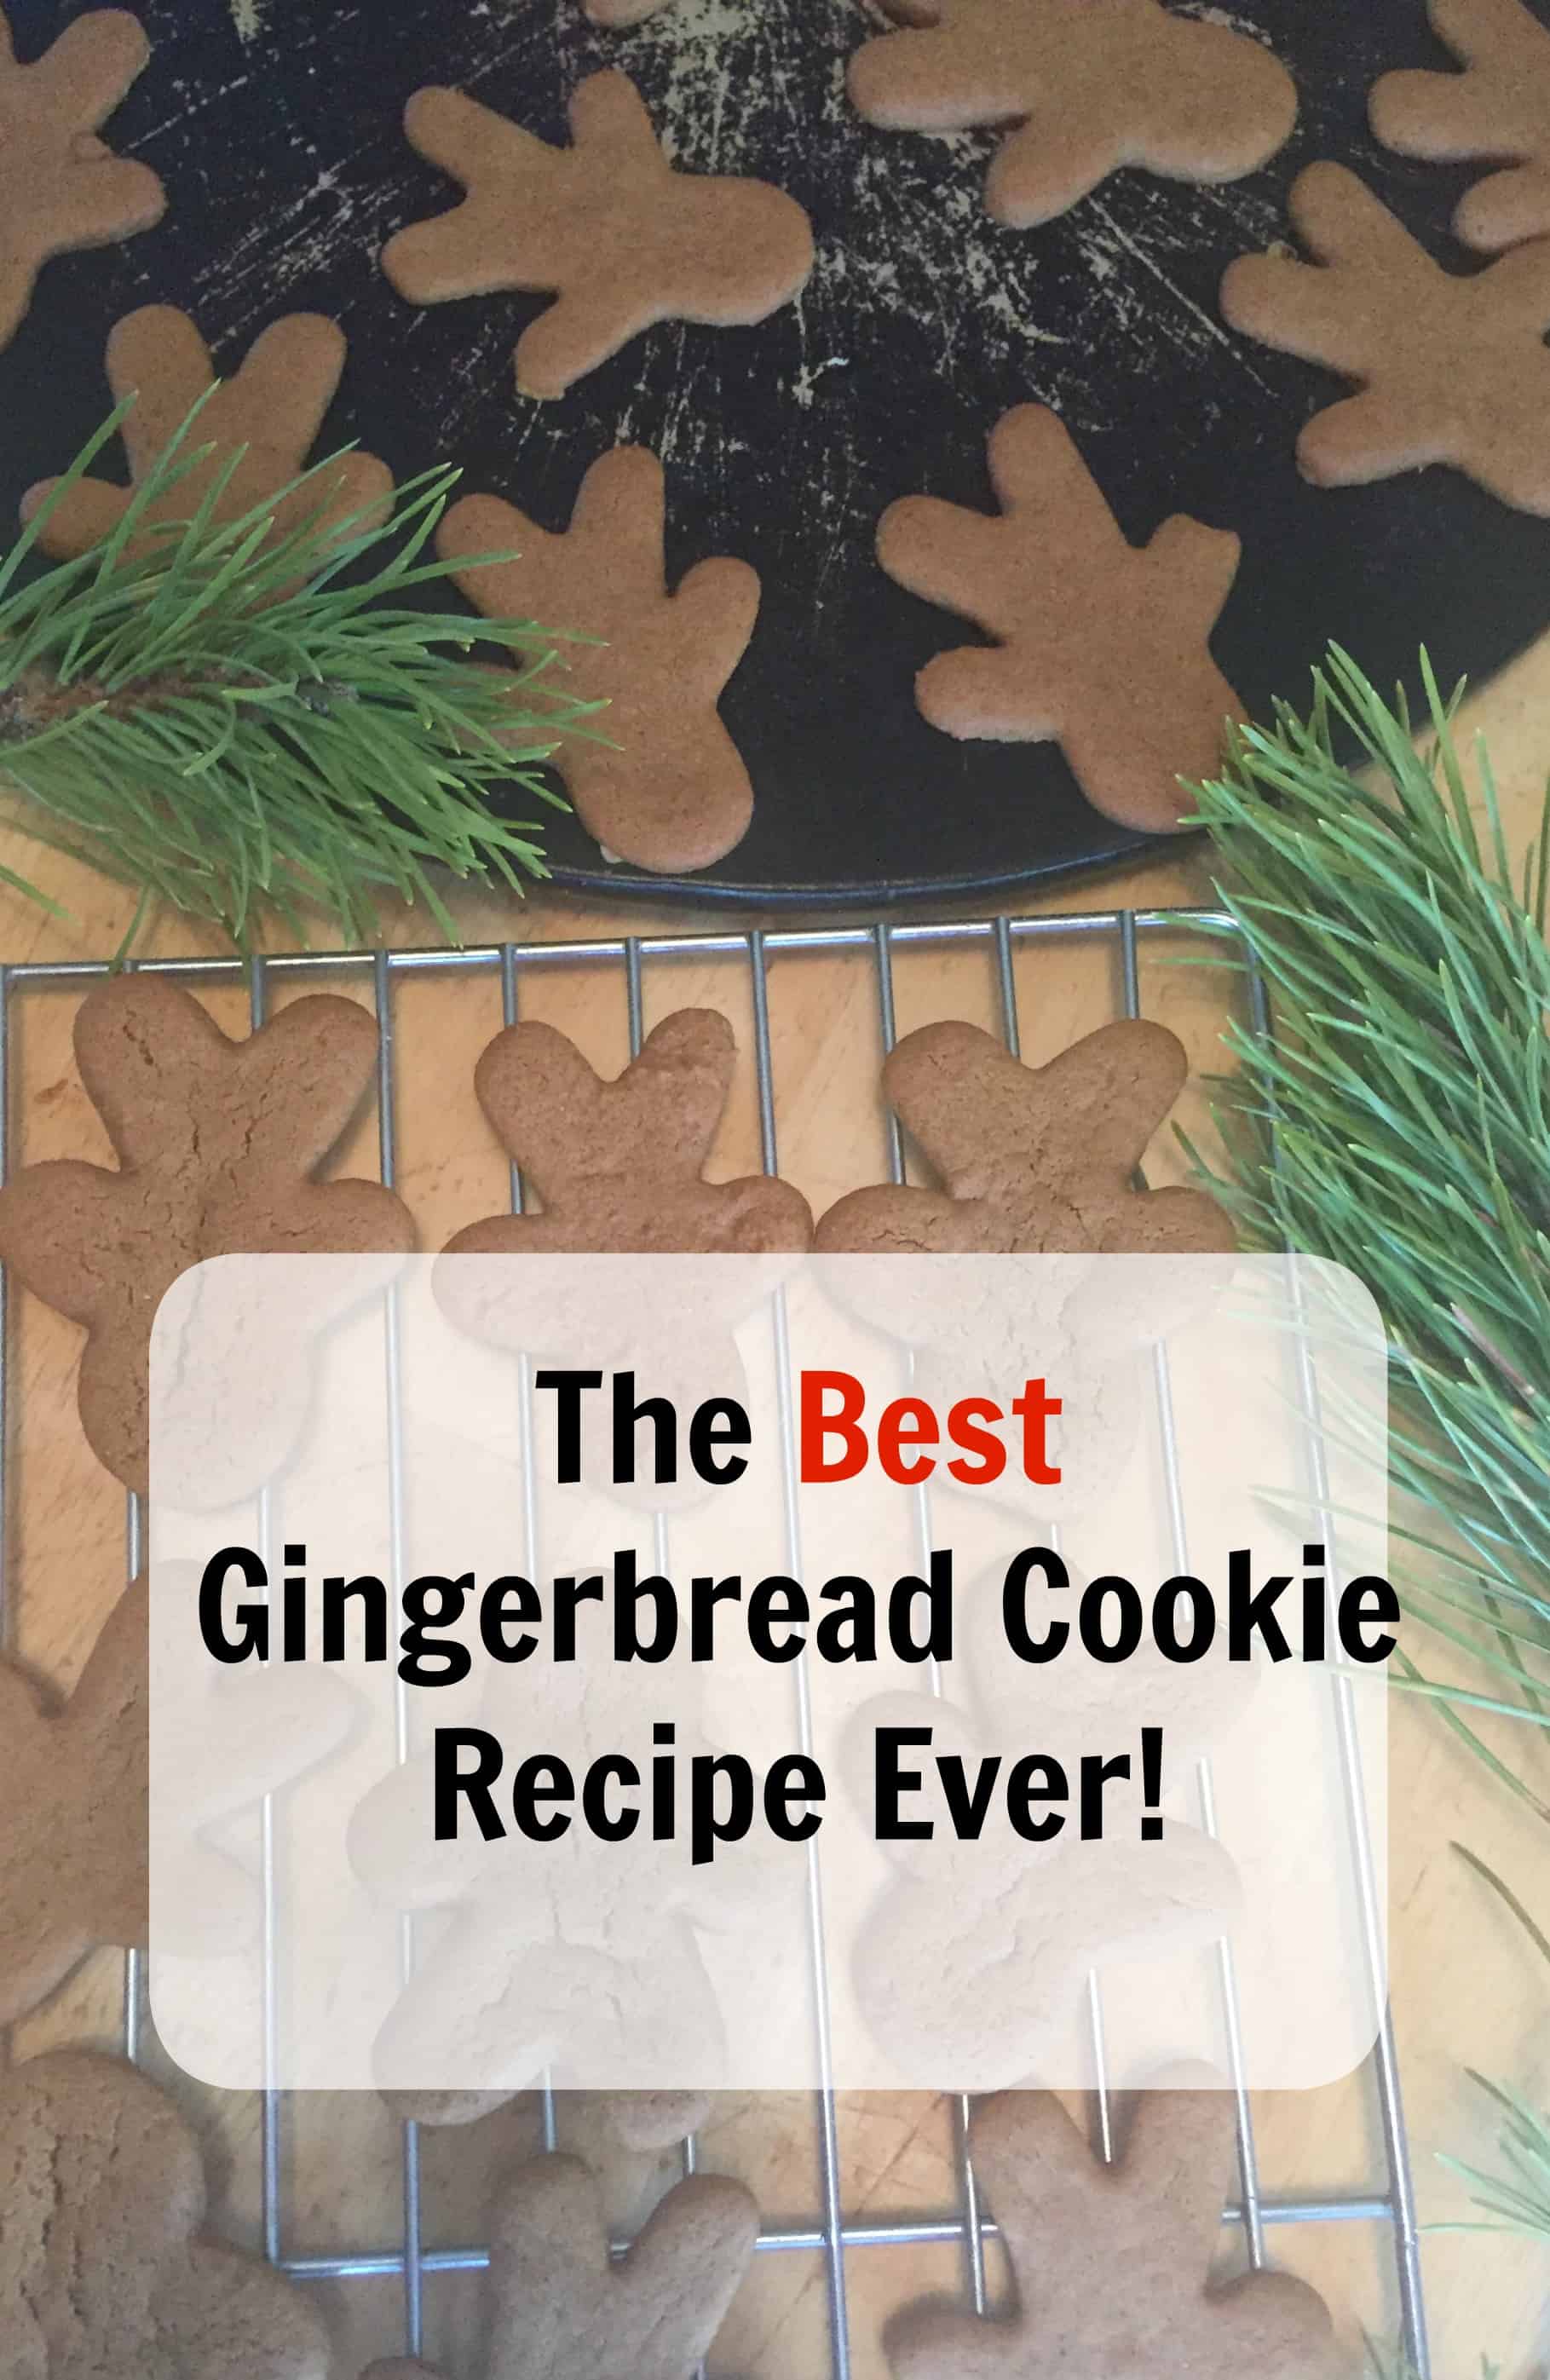 The Best gingerbread Cookie recipe ever!